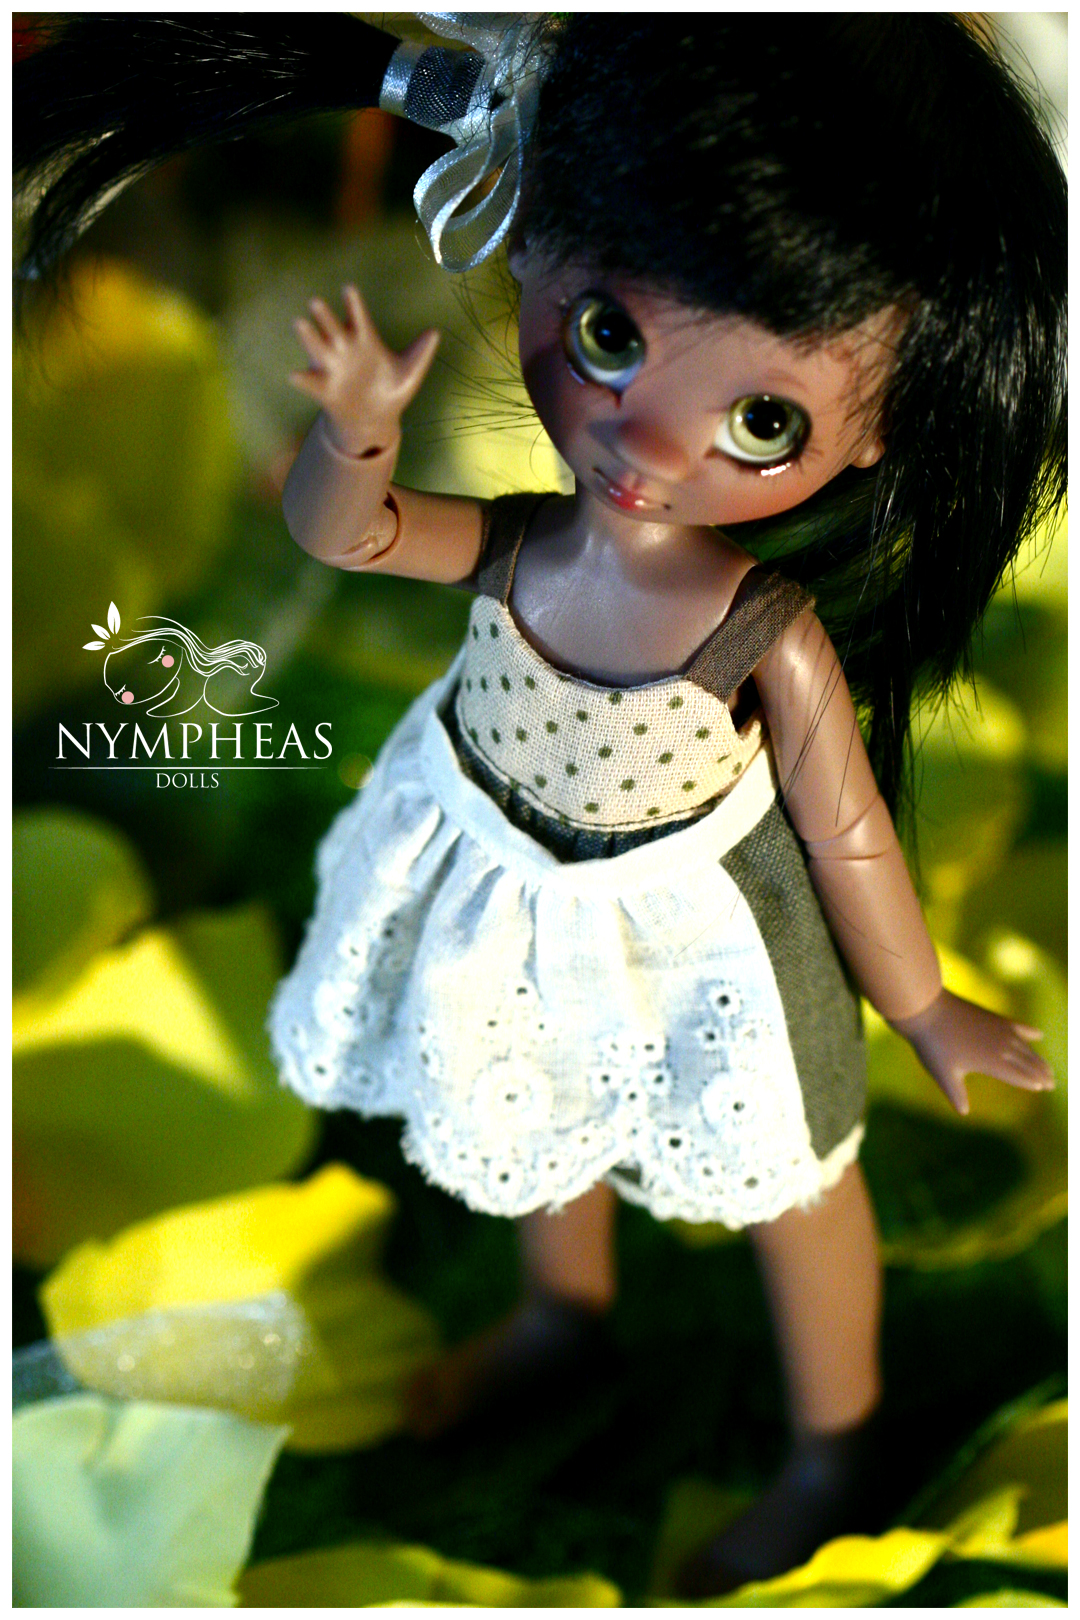 [NYMPHEAS DOLLS]  P39 : Biches améthystes - Page 3 IMG_8864